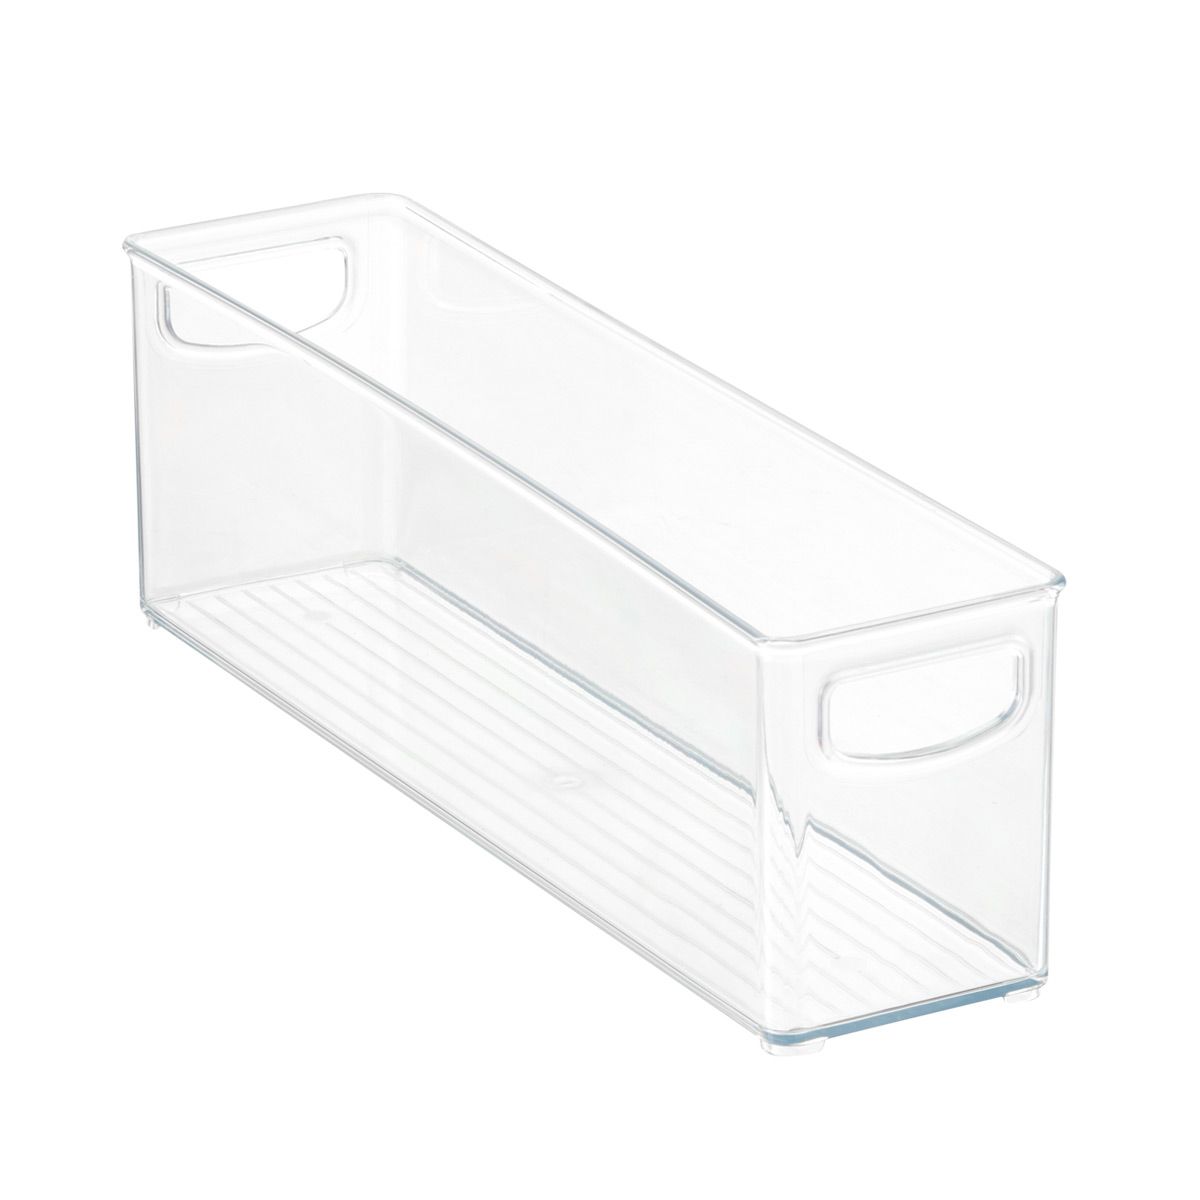 iDESIGN Linus Small Deep Drawer Bin ClearSKU:100599164.769 Reviews | The Container Store